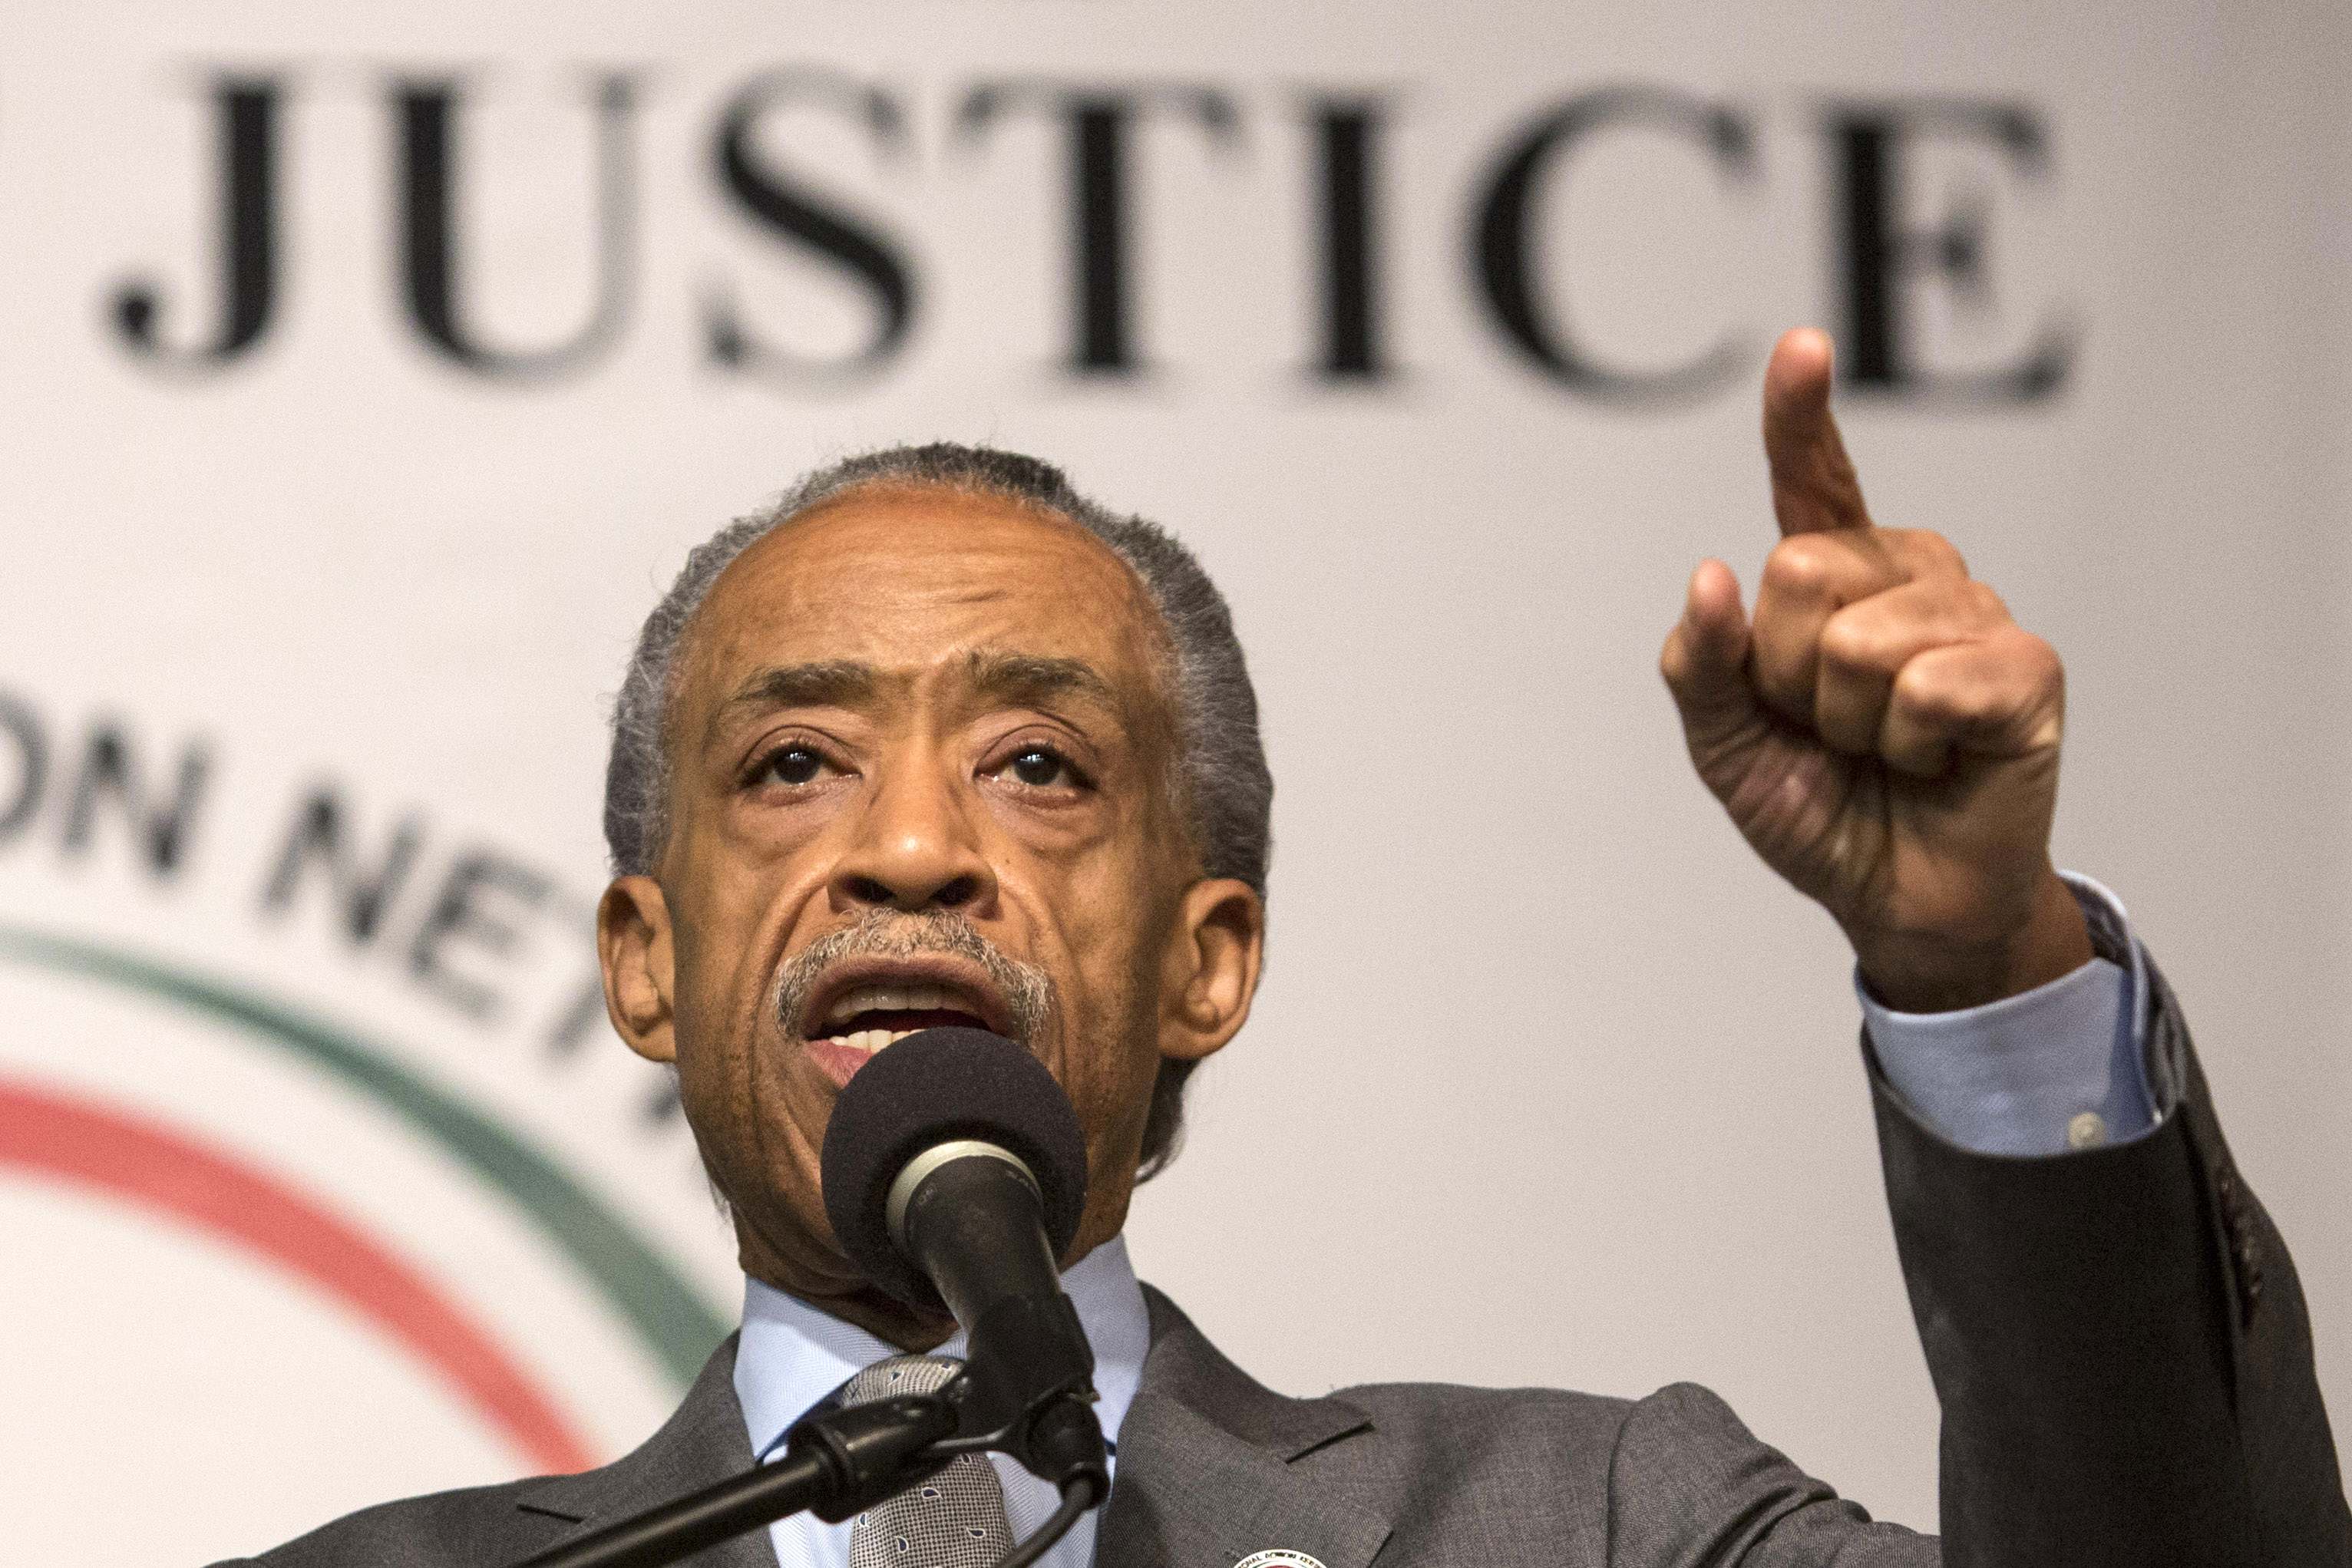 Sony Exec May Face Call from Sharpton to Resign over Emails About Race